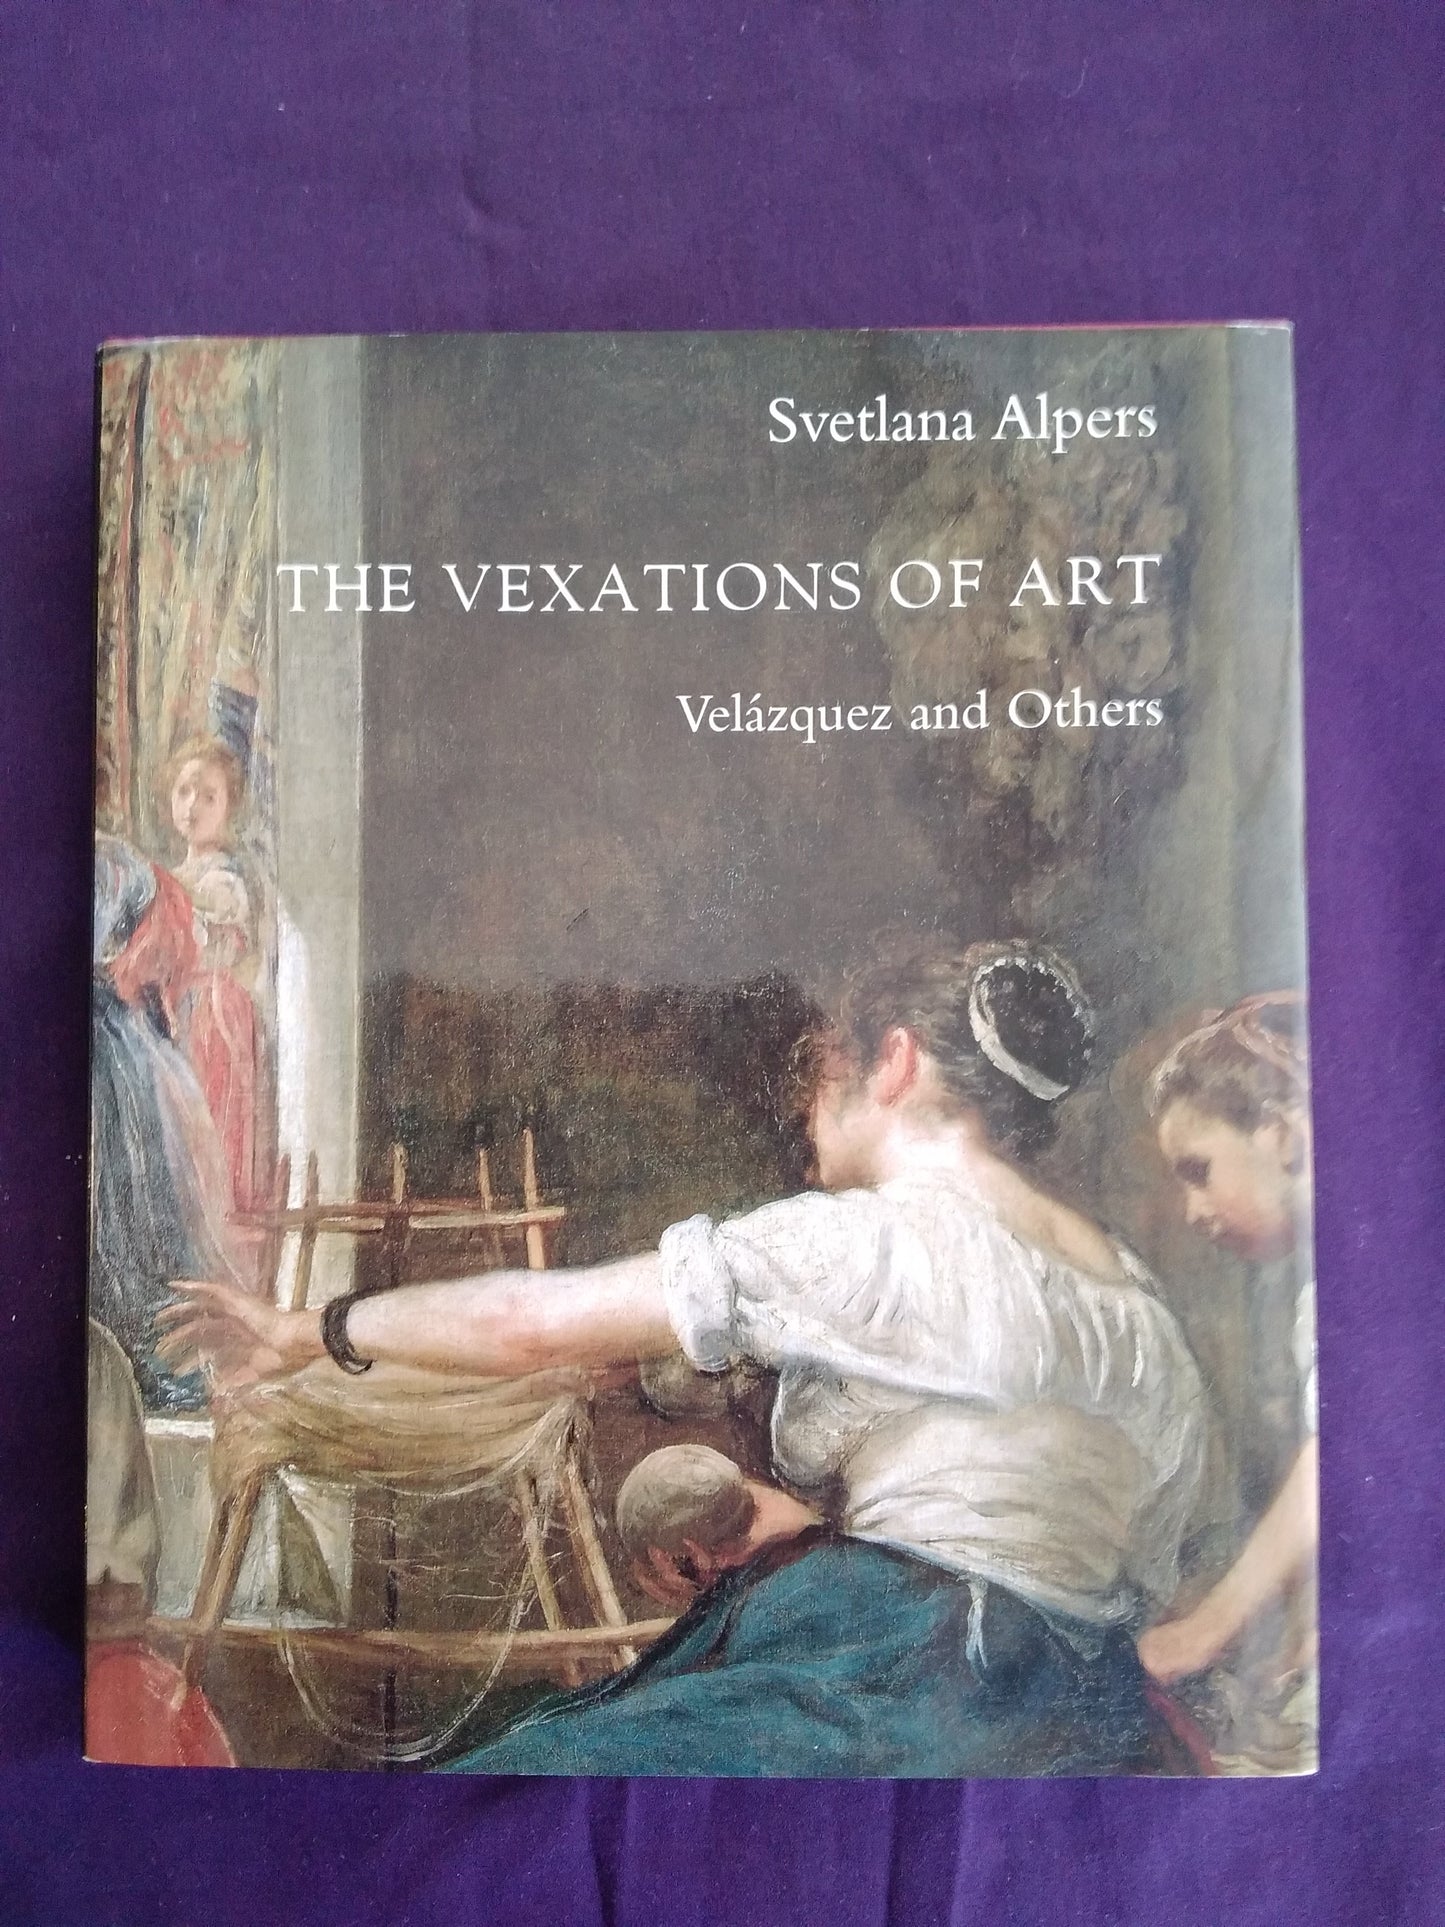 The Vexations of Art: Velázquez and Others by Svetlana Alpers - Hardcover